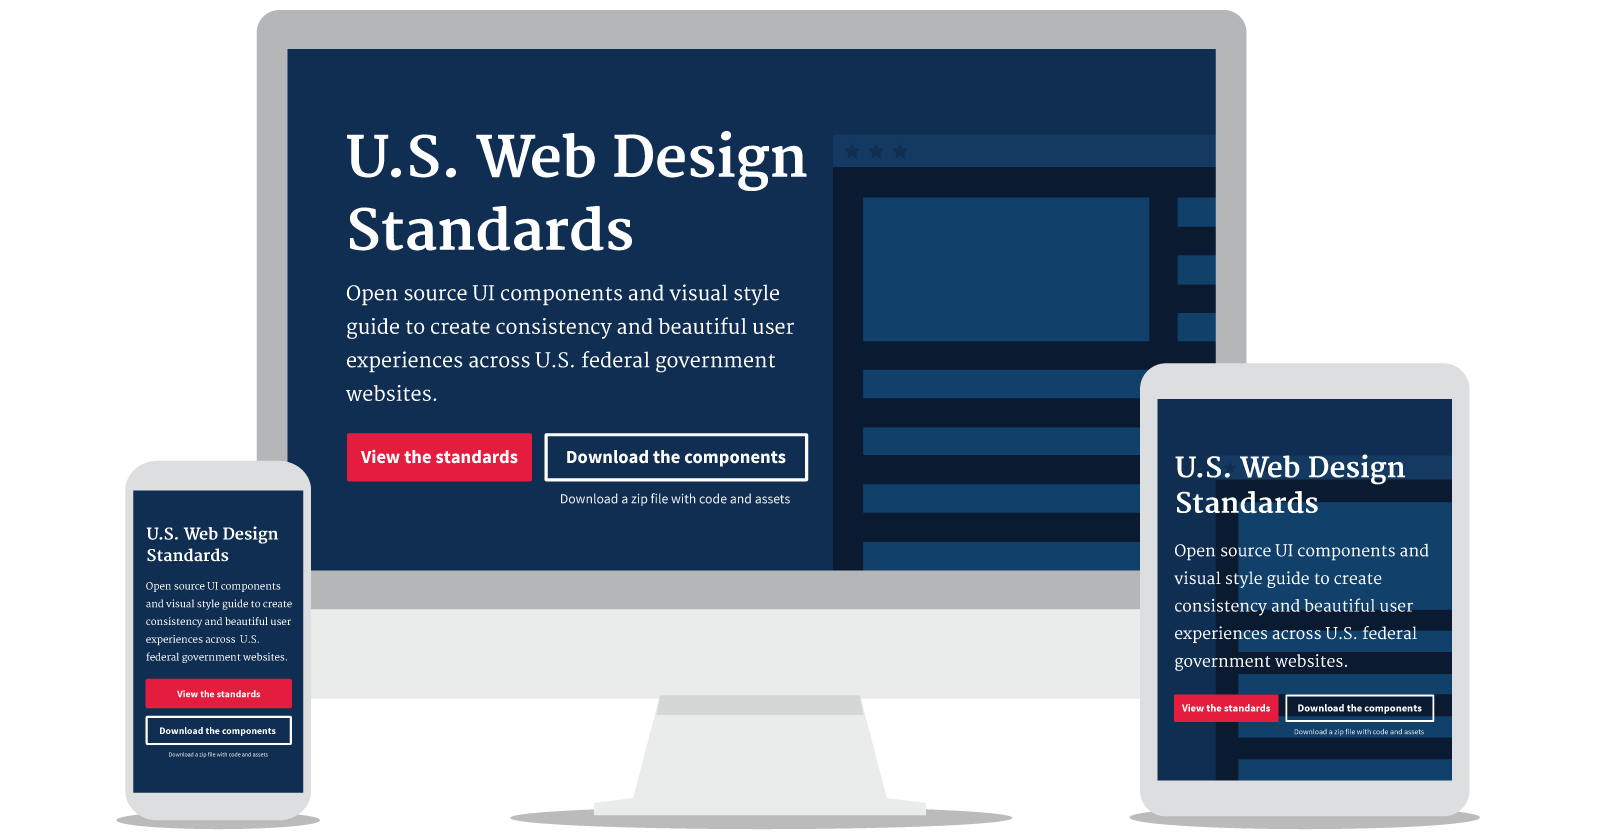 The web design standards on multiple sizes of screen